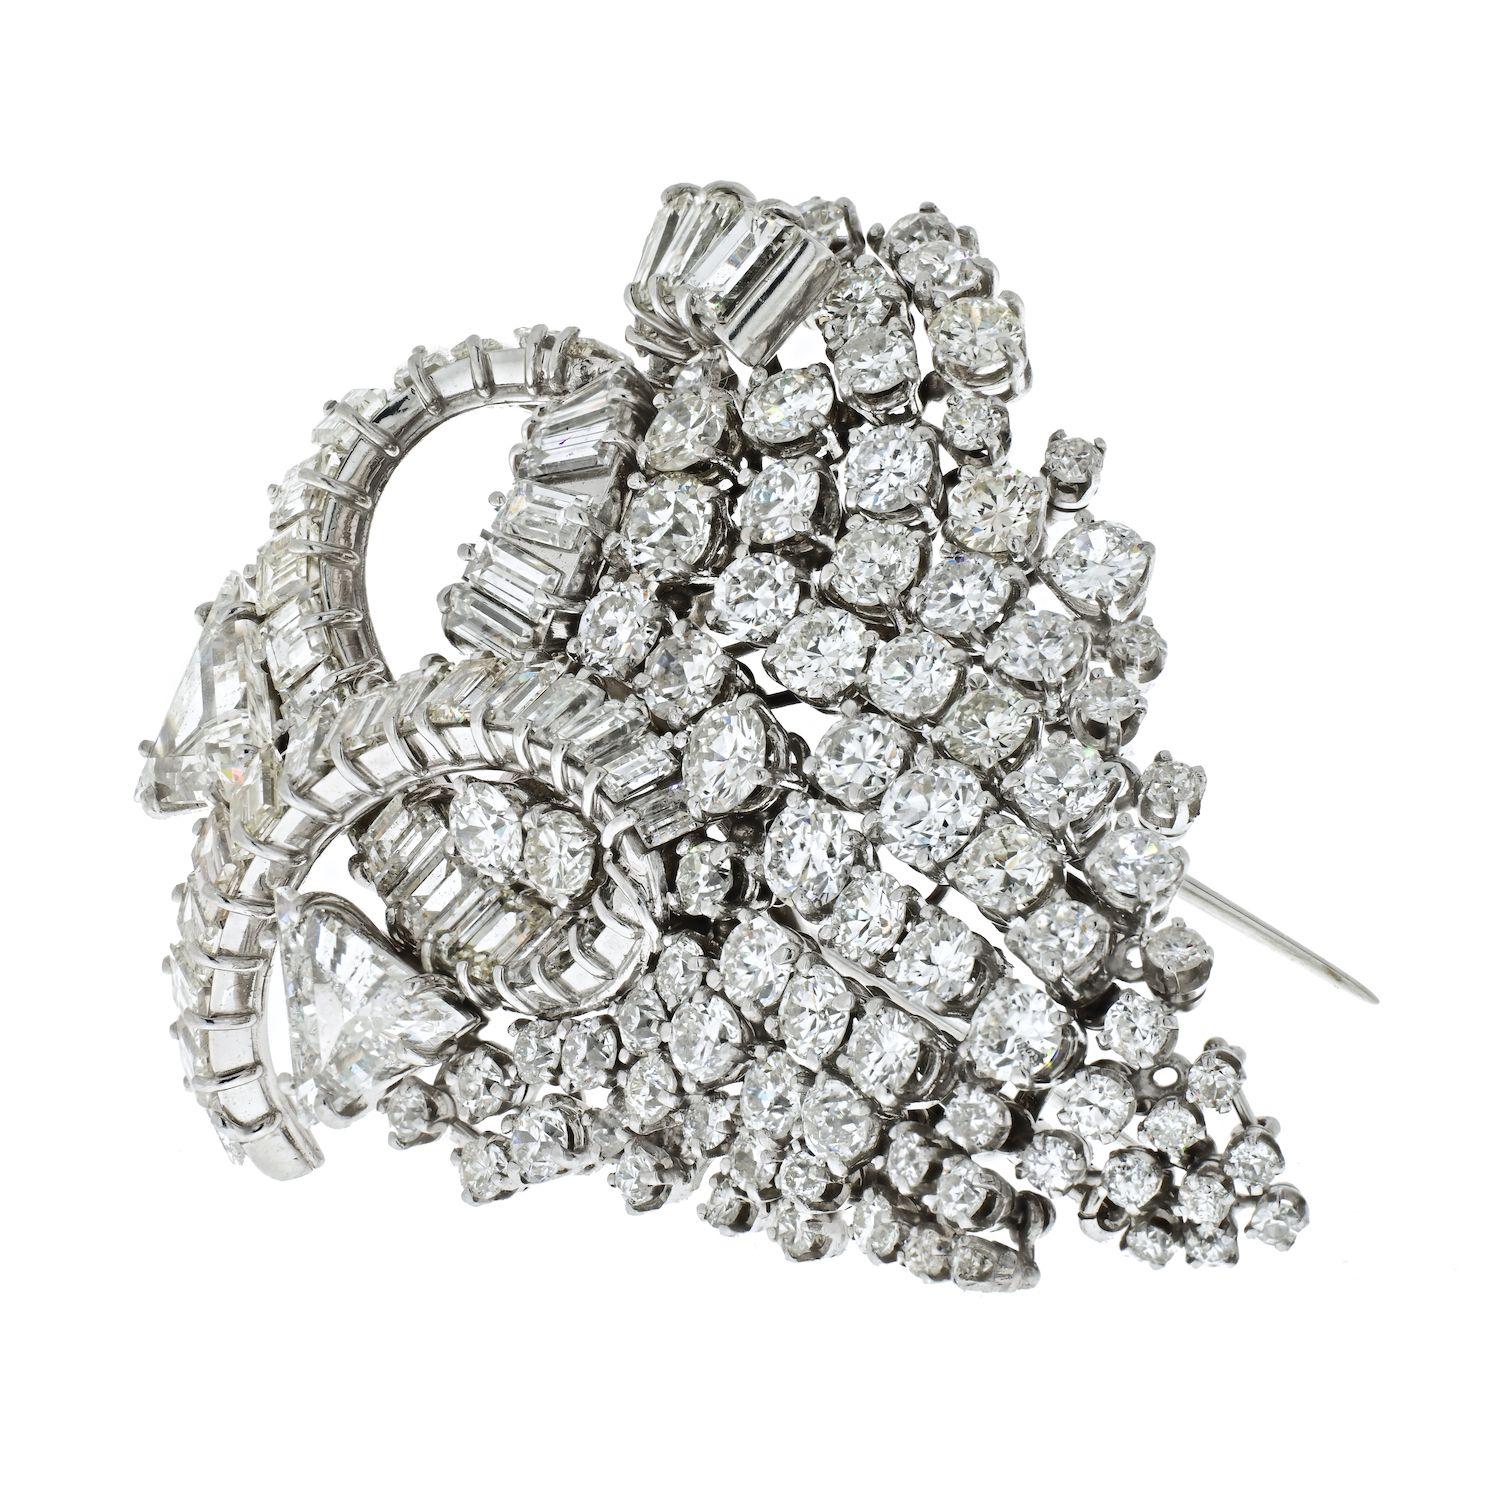 This is an impressive David Webb cluster diamond brooch crafted in 1960's set in platinum.
All diamonds are of an exceptionally white quality and grade between F to G color and VS1-VS2 clarity. 
Double pin fastening. 
Brooch measures about 2 inches